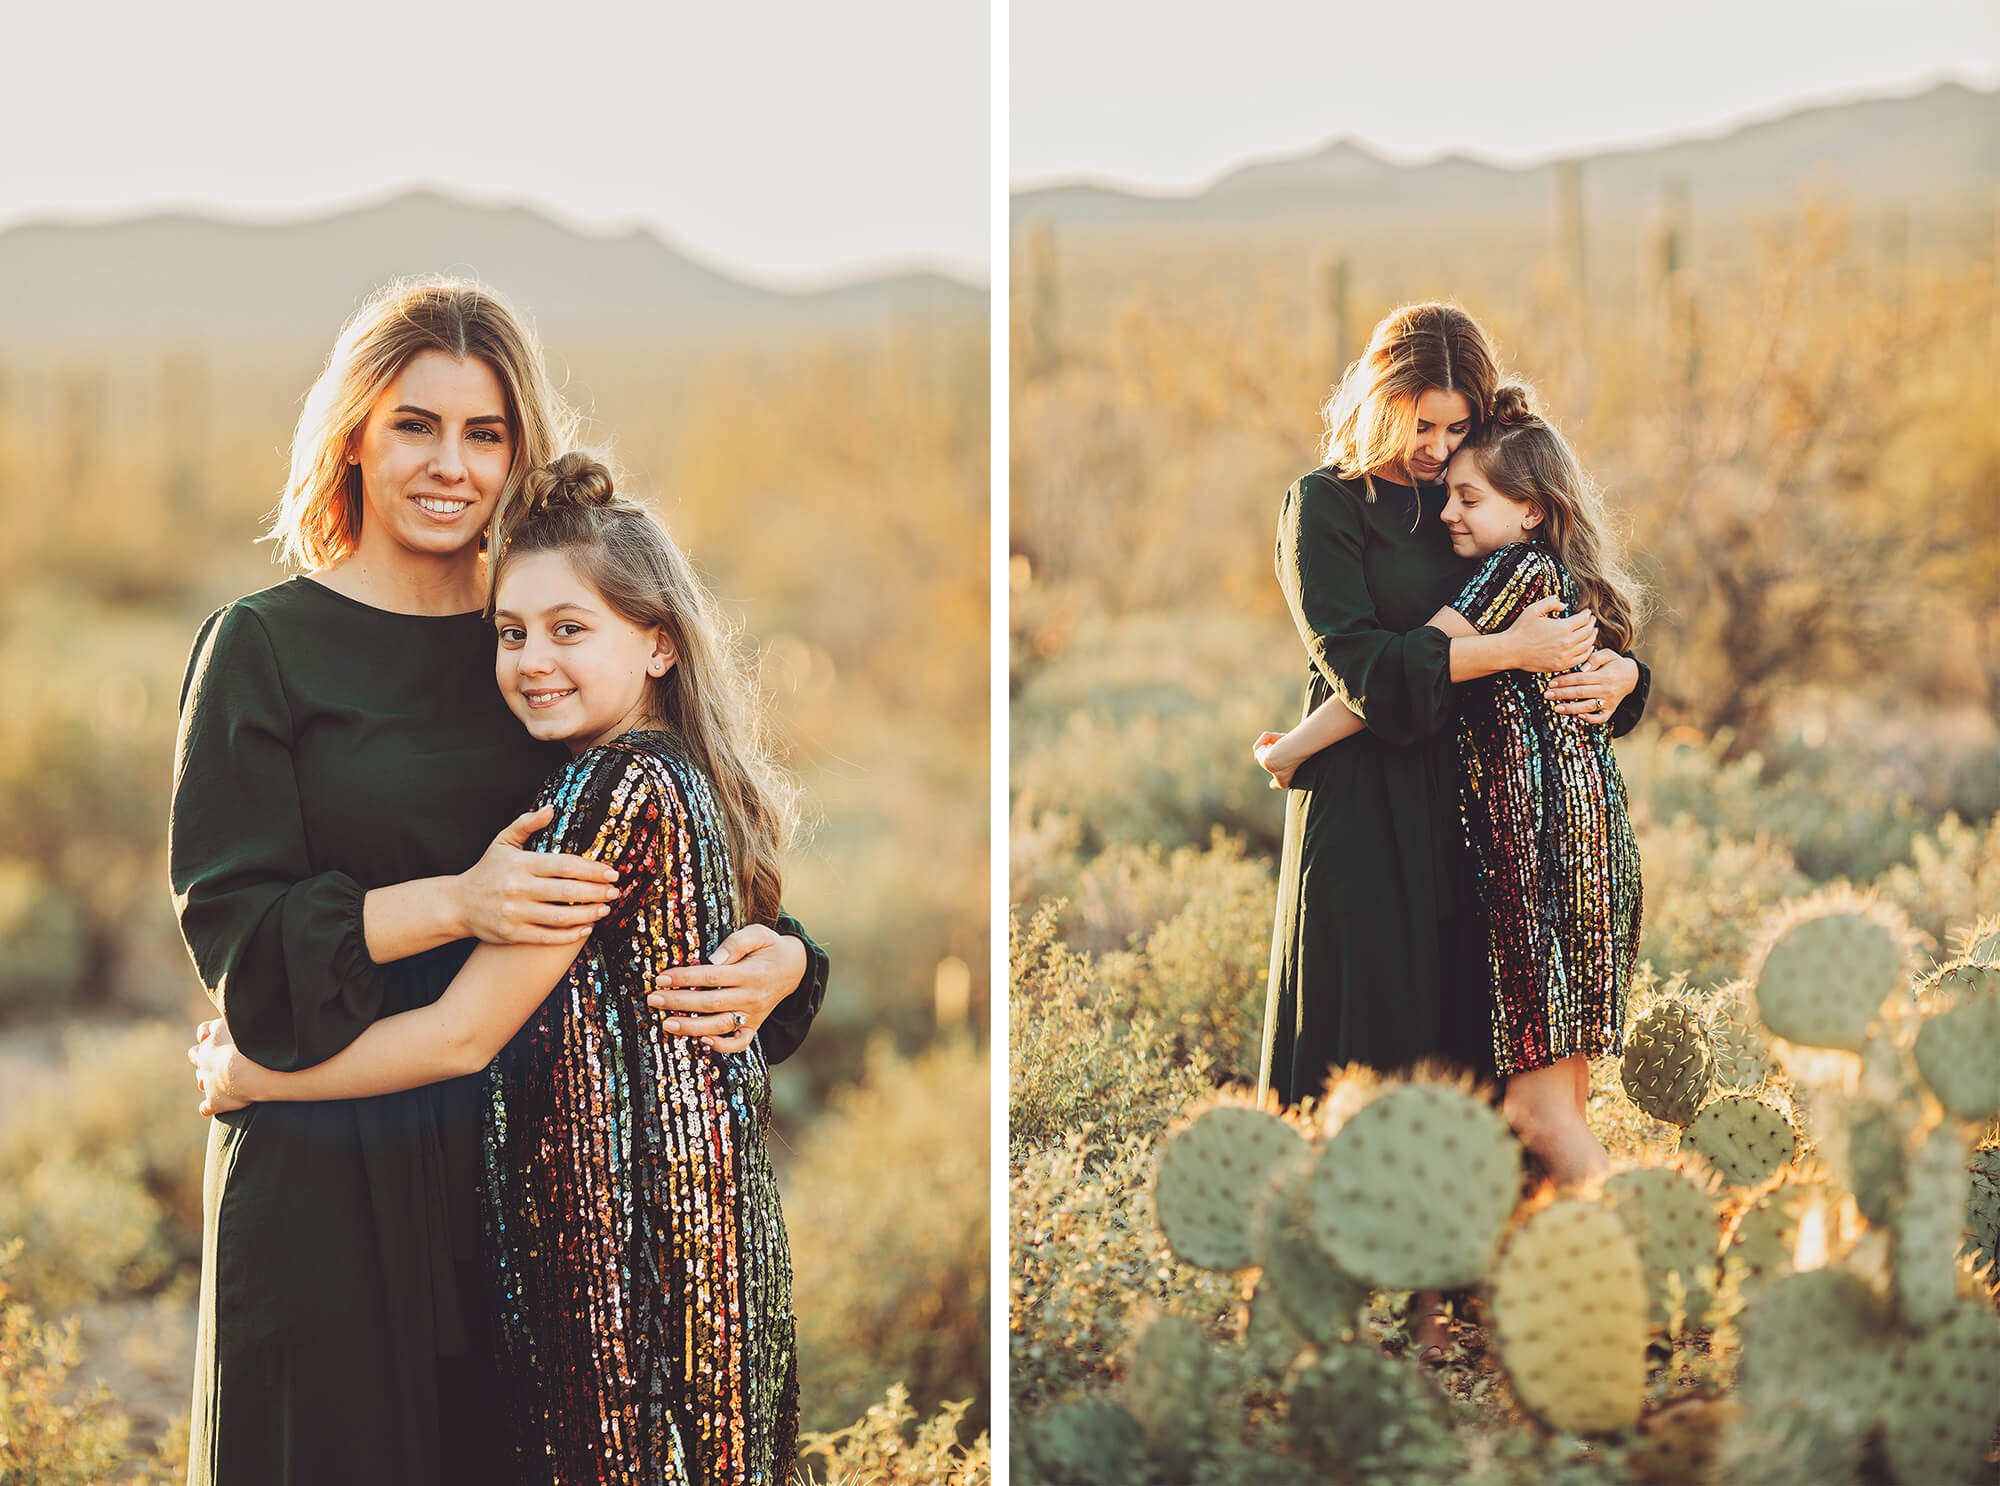 Mother and daughter hold one another lovingly during the Gunter's family photo session in a desert location just outside of Tucson